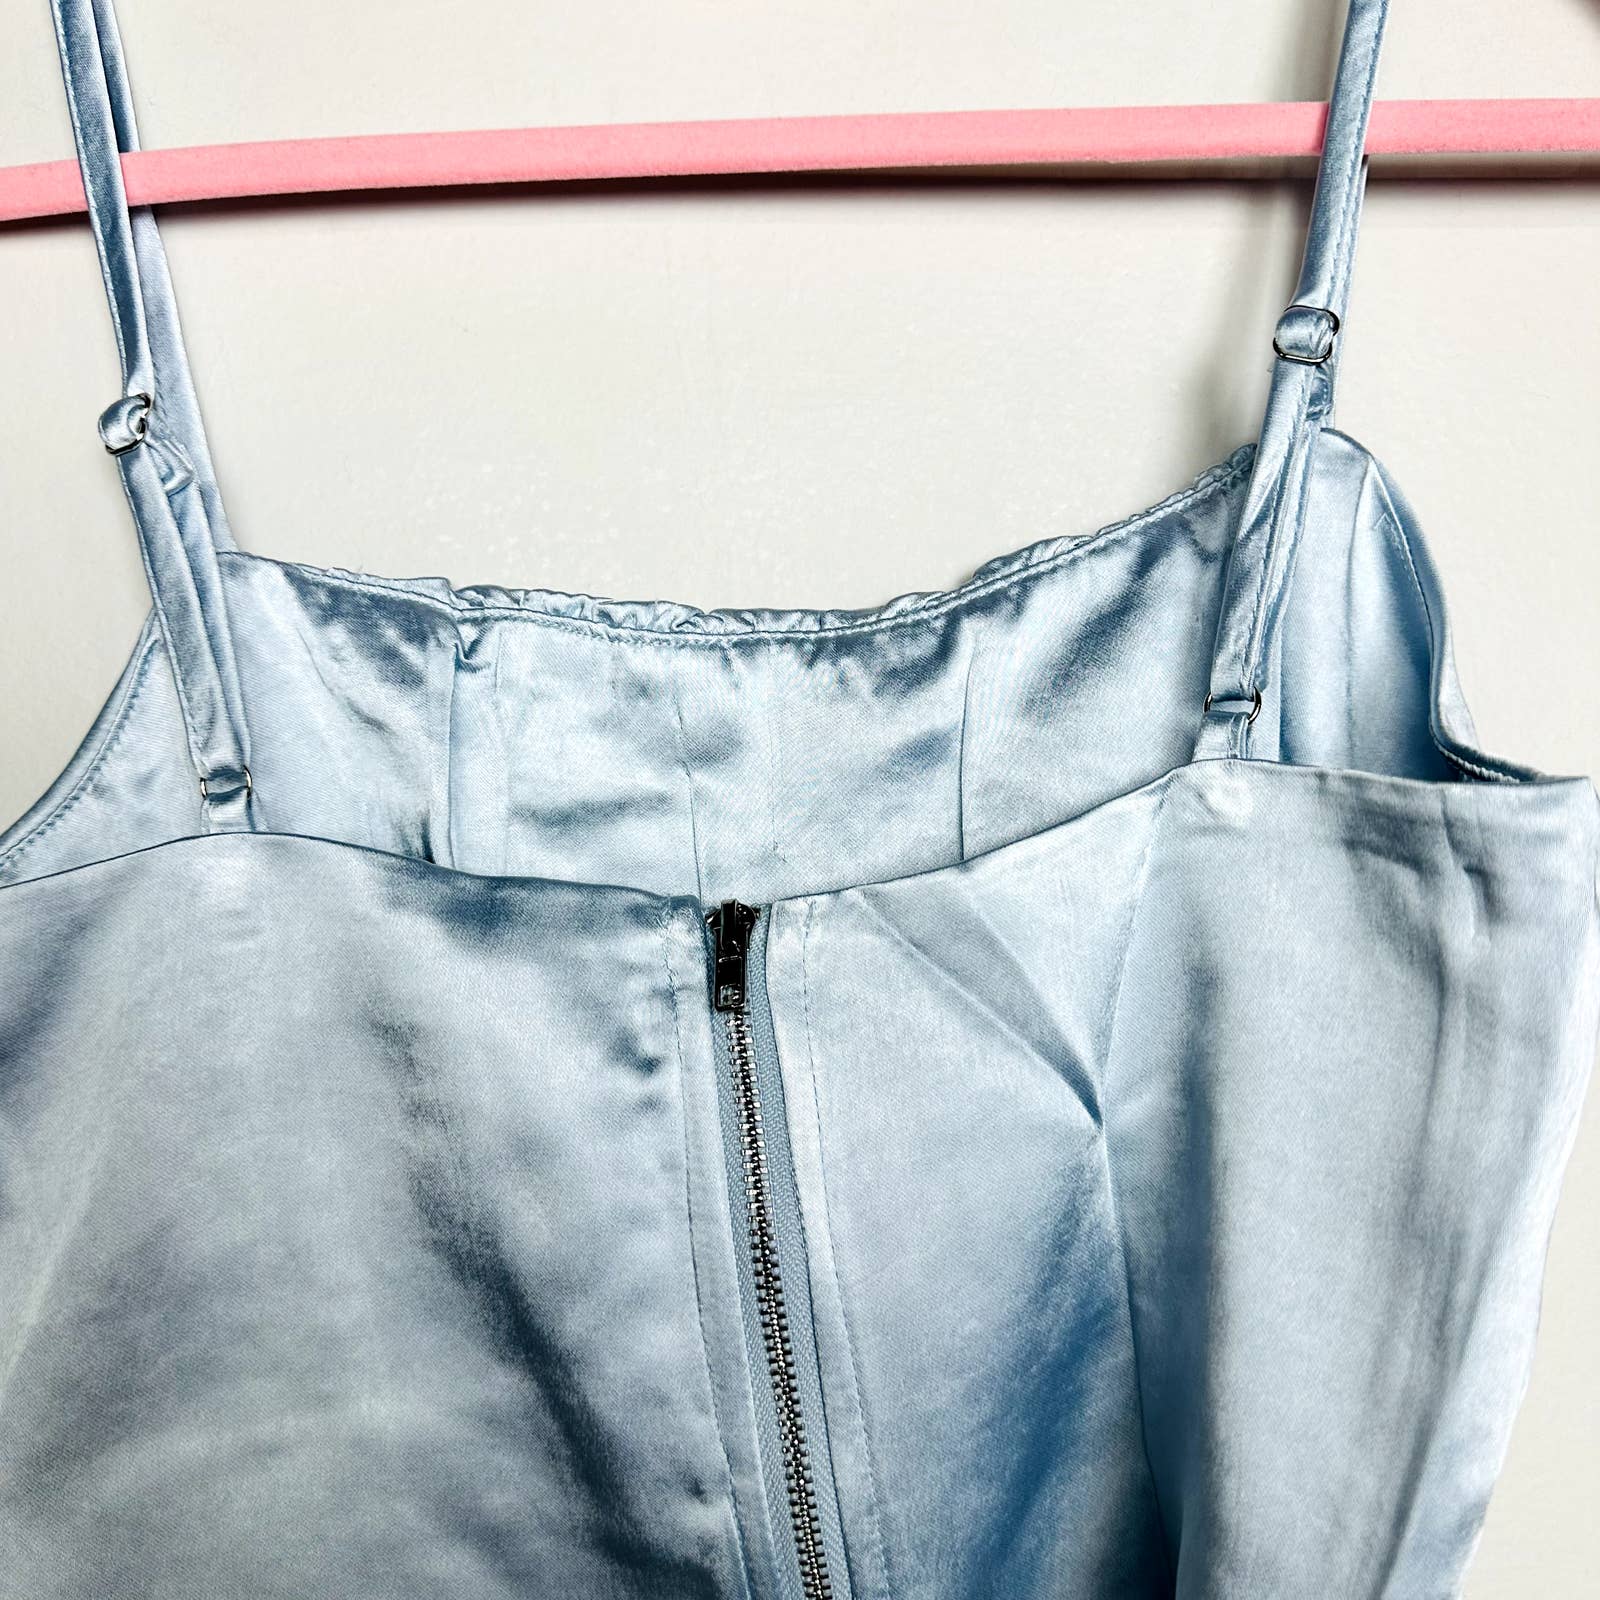 Lulus NWT Luxe'd Out Satin Silk Scoop Neck Cropped Tank Top Light Blue Size XS